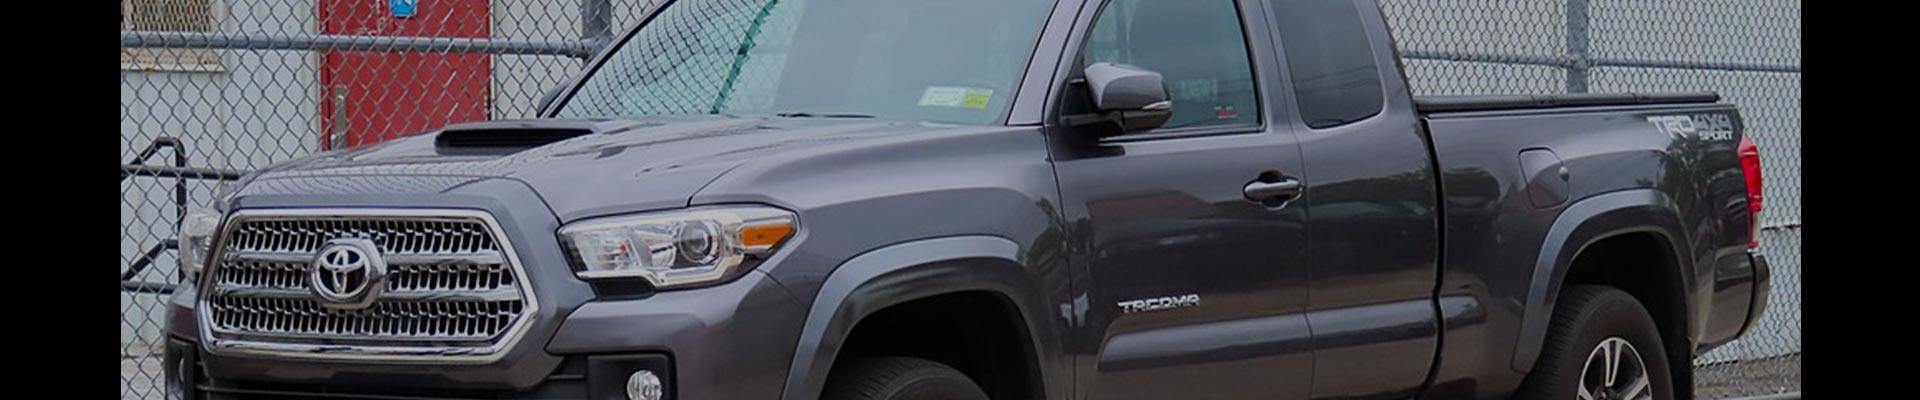 Shop Replacement and OEM 2014 Toyota Tacoma Parts with Discounted Price on the Net